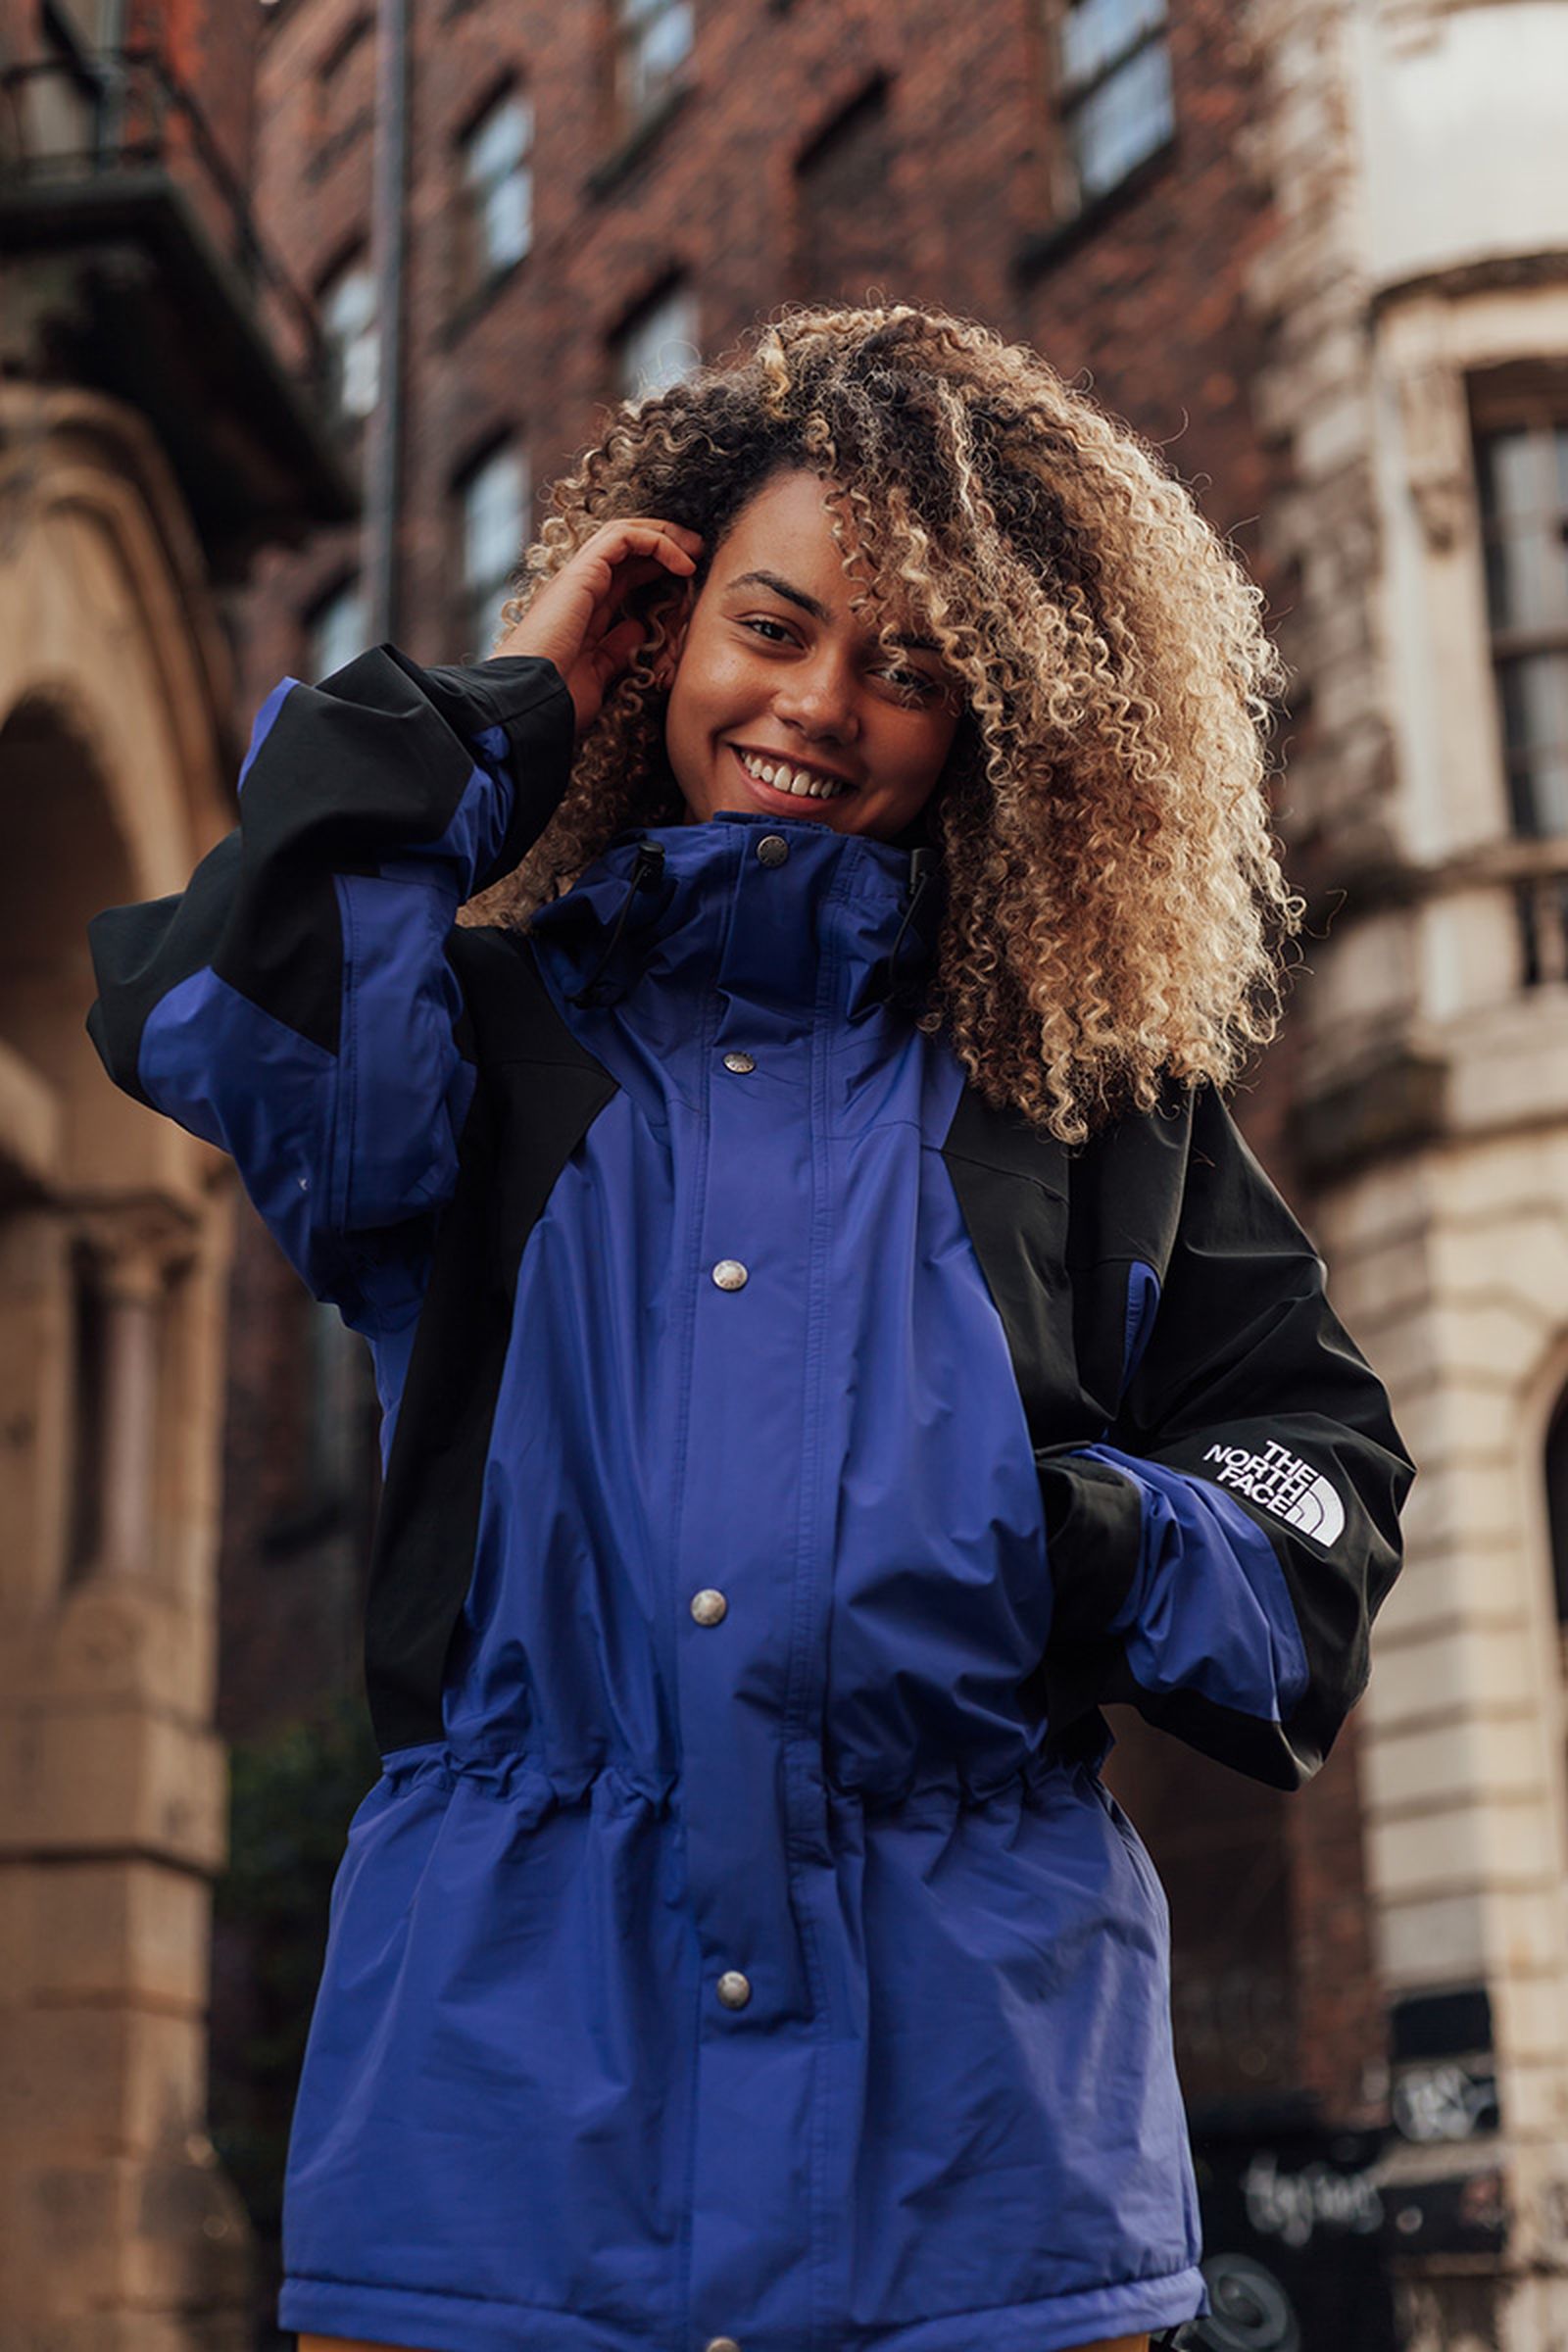 The North Face's Latest Jacket Is An Iconic '90s Revival